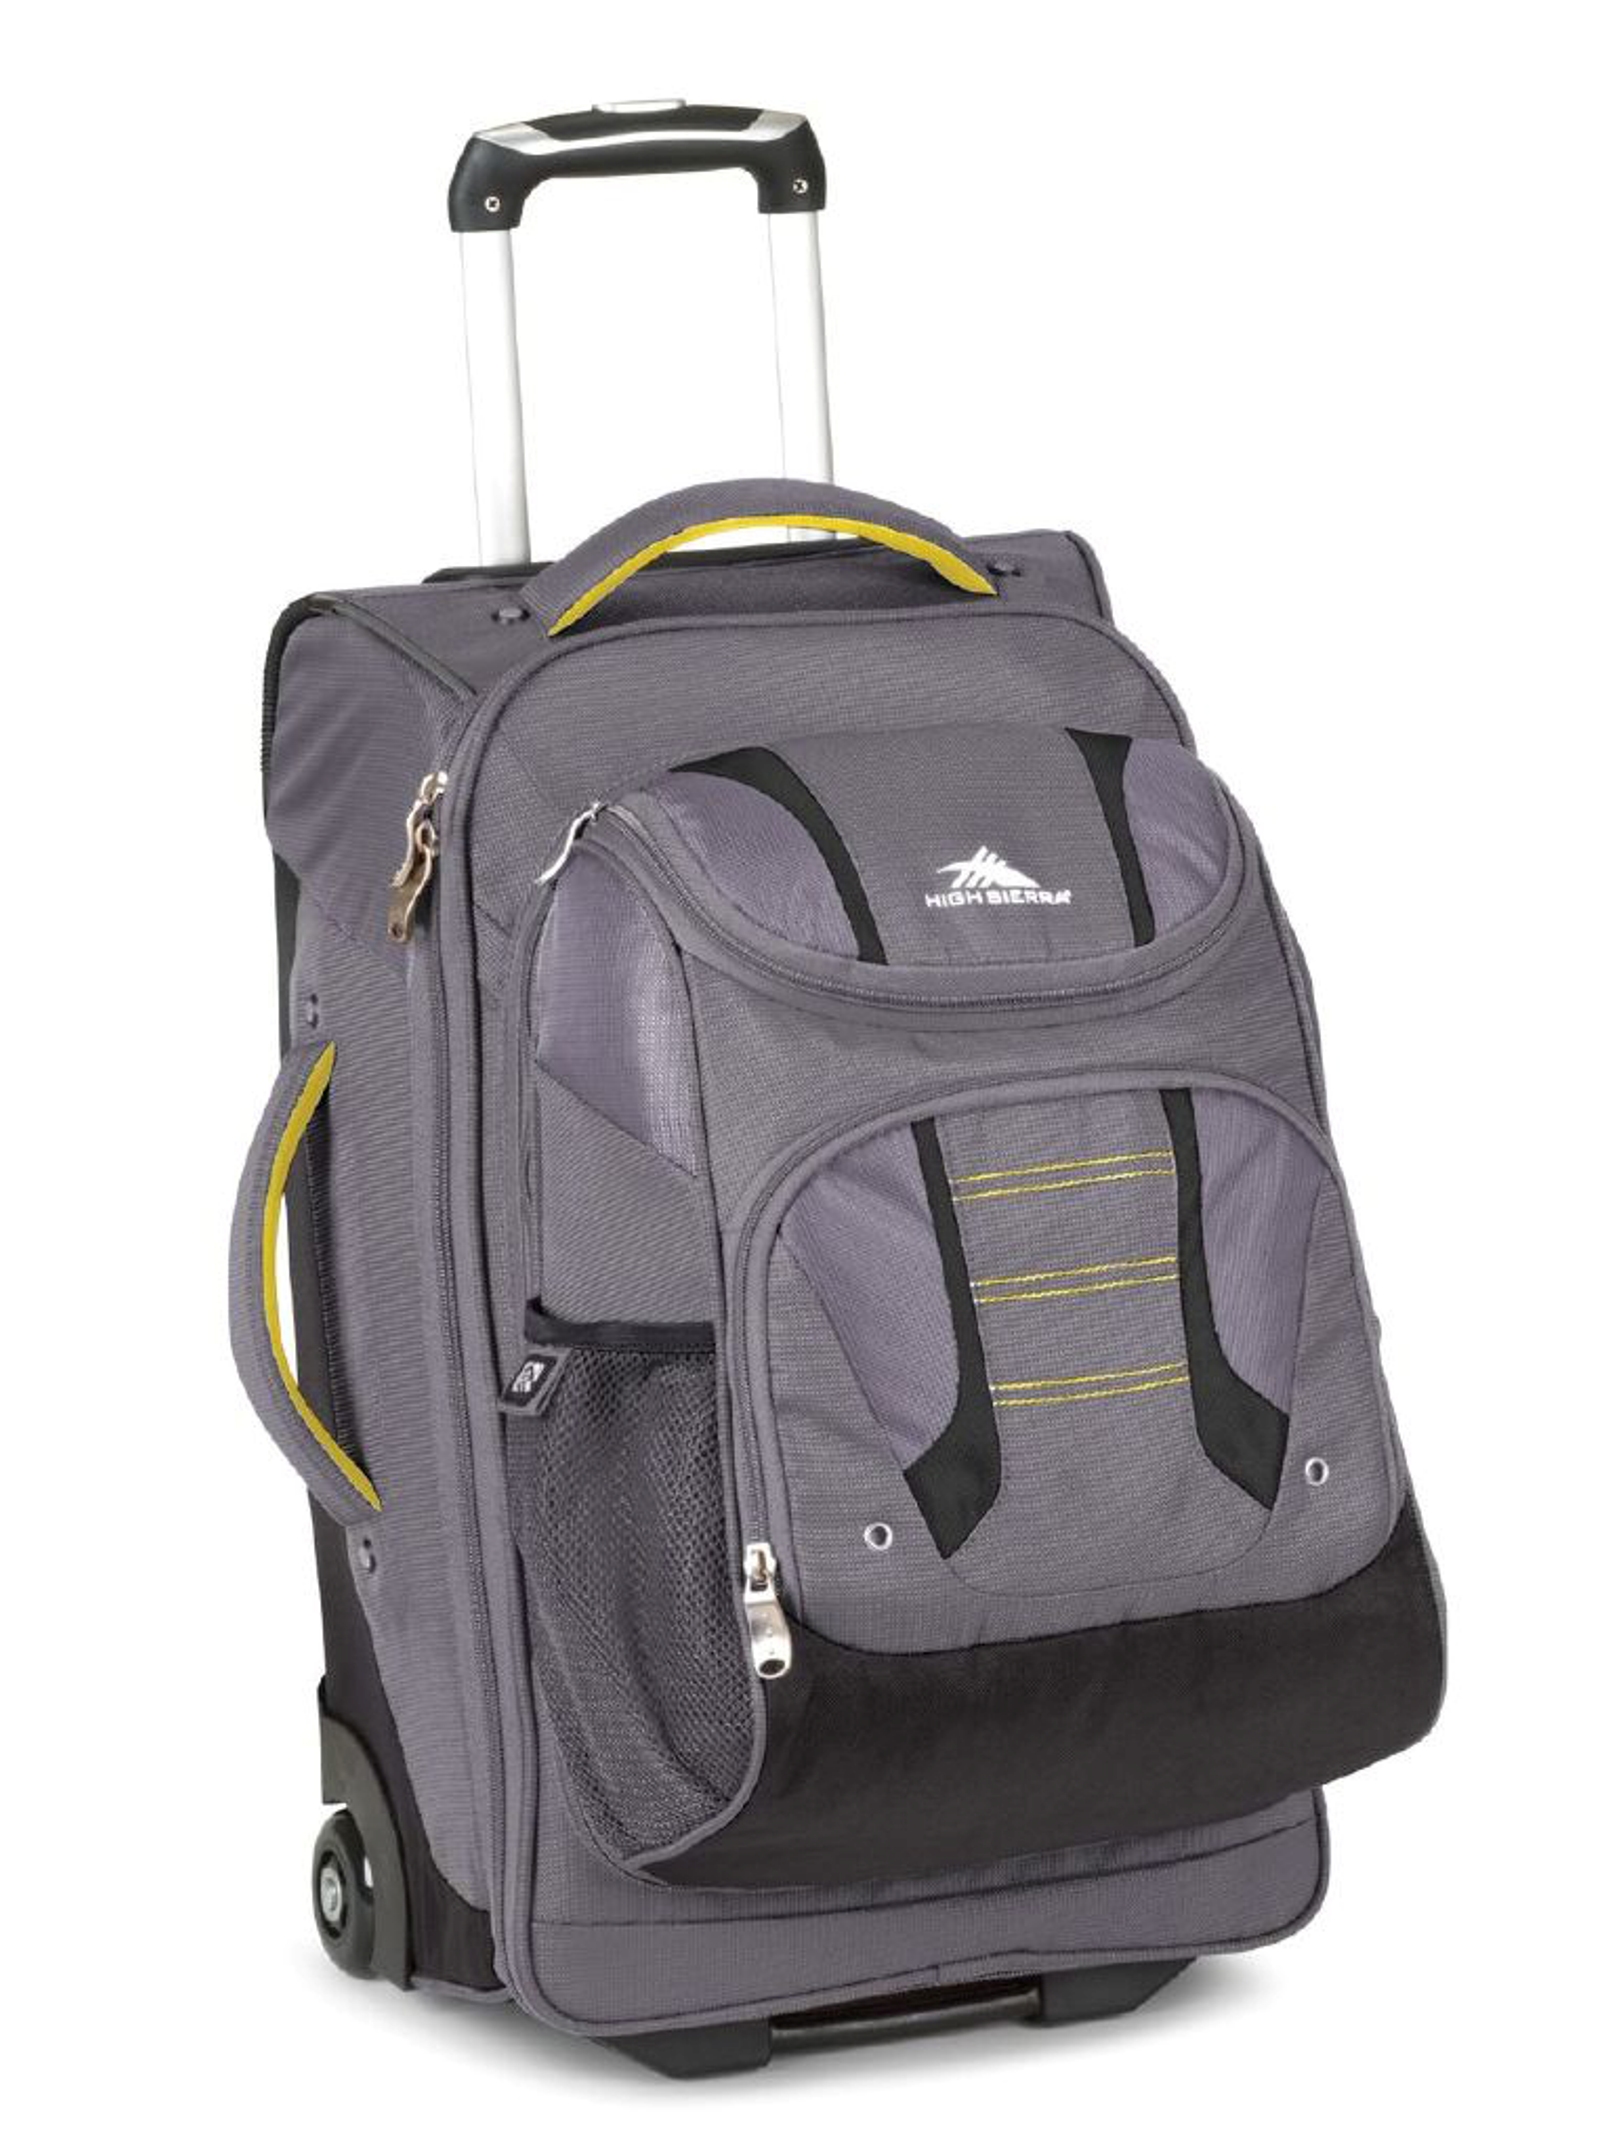 High Sierra 22 Carry On Wheeled Backpack with Removable Daypack